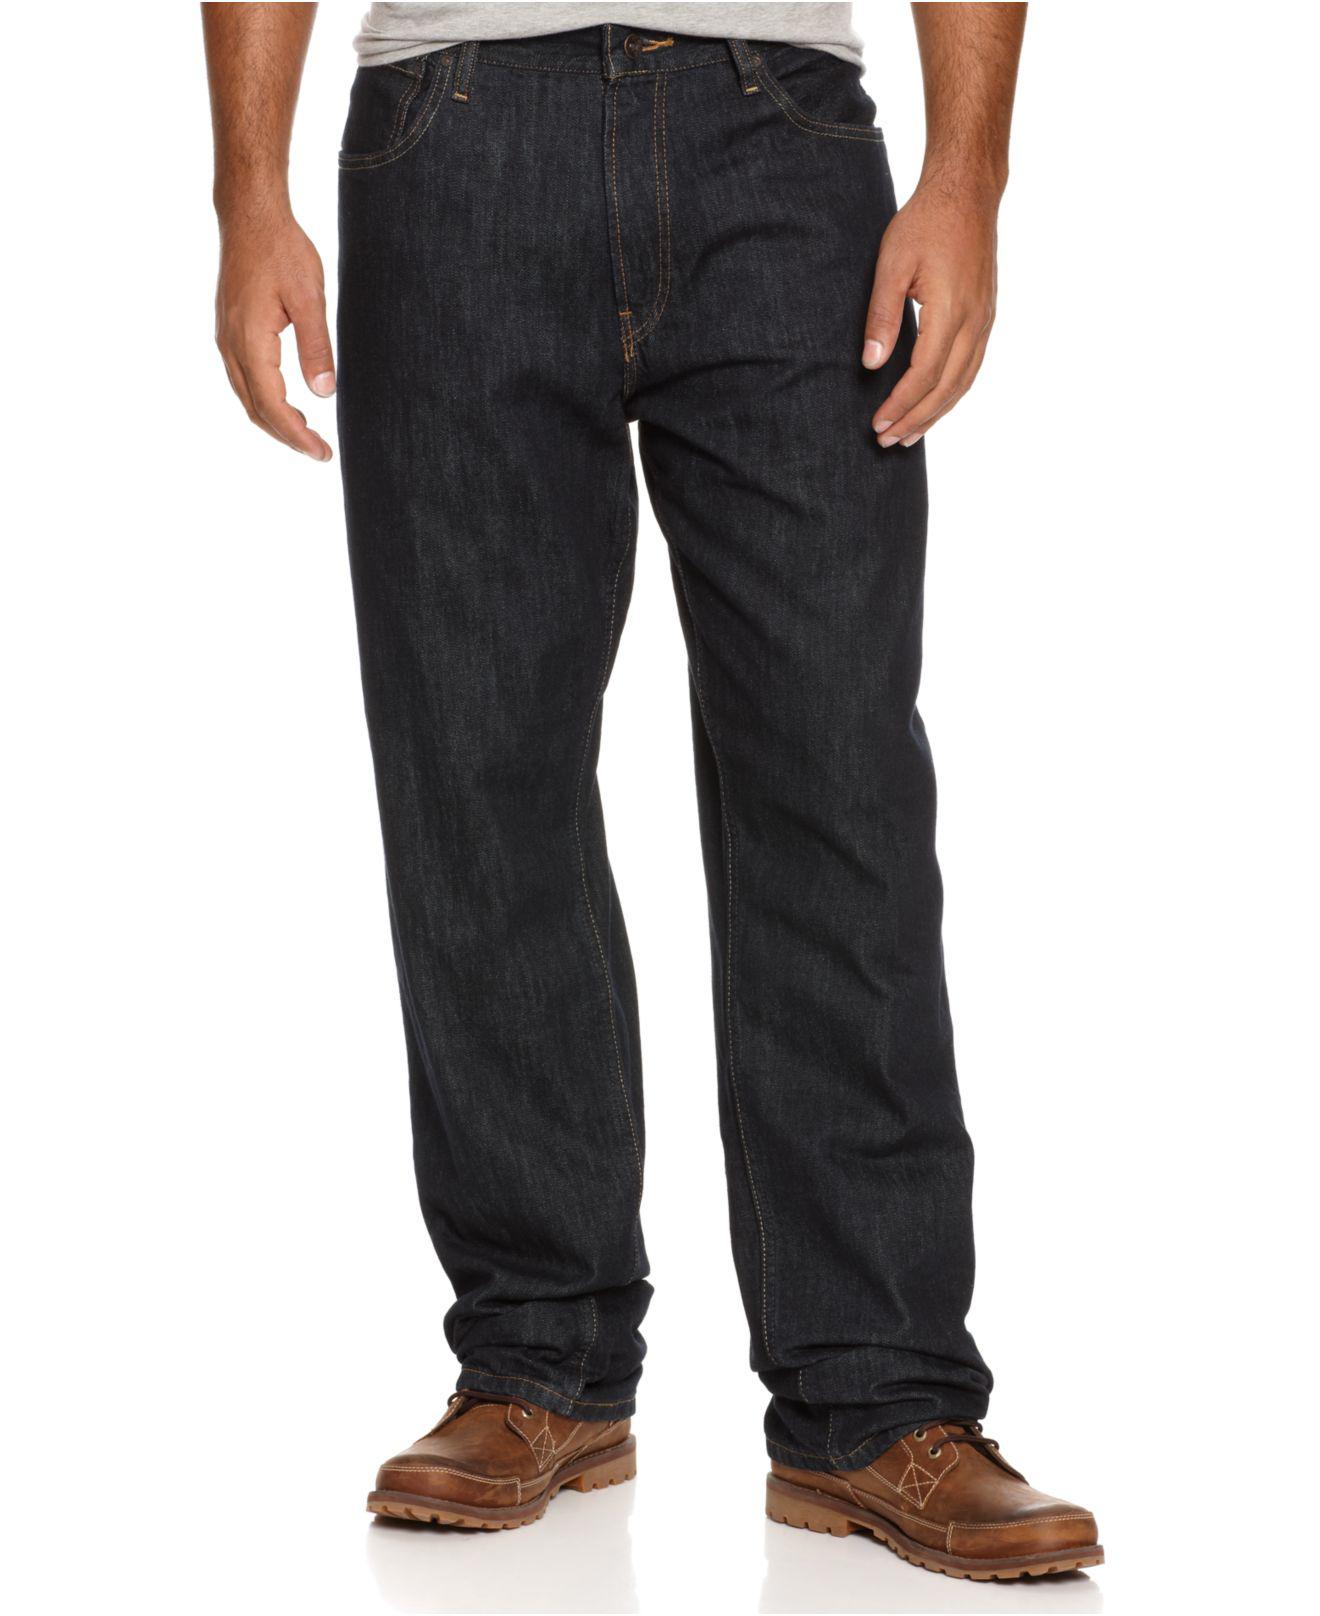 Nautica Denim Jeans, Relaxed-fit Jeans for Men - Lyst